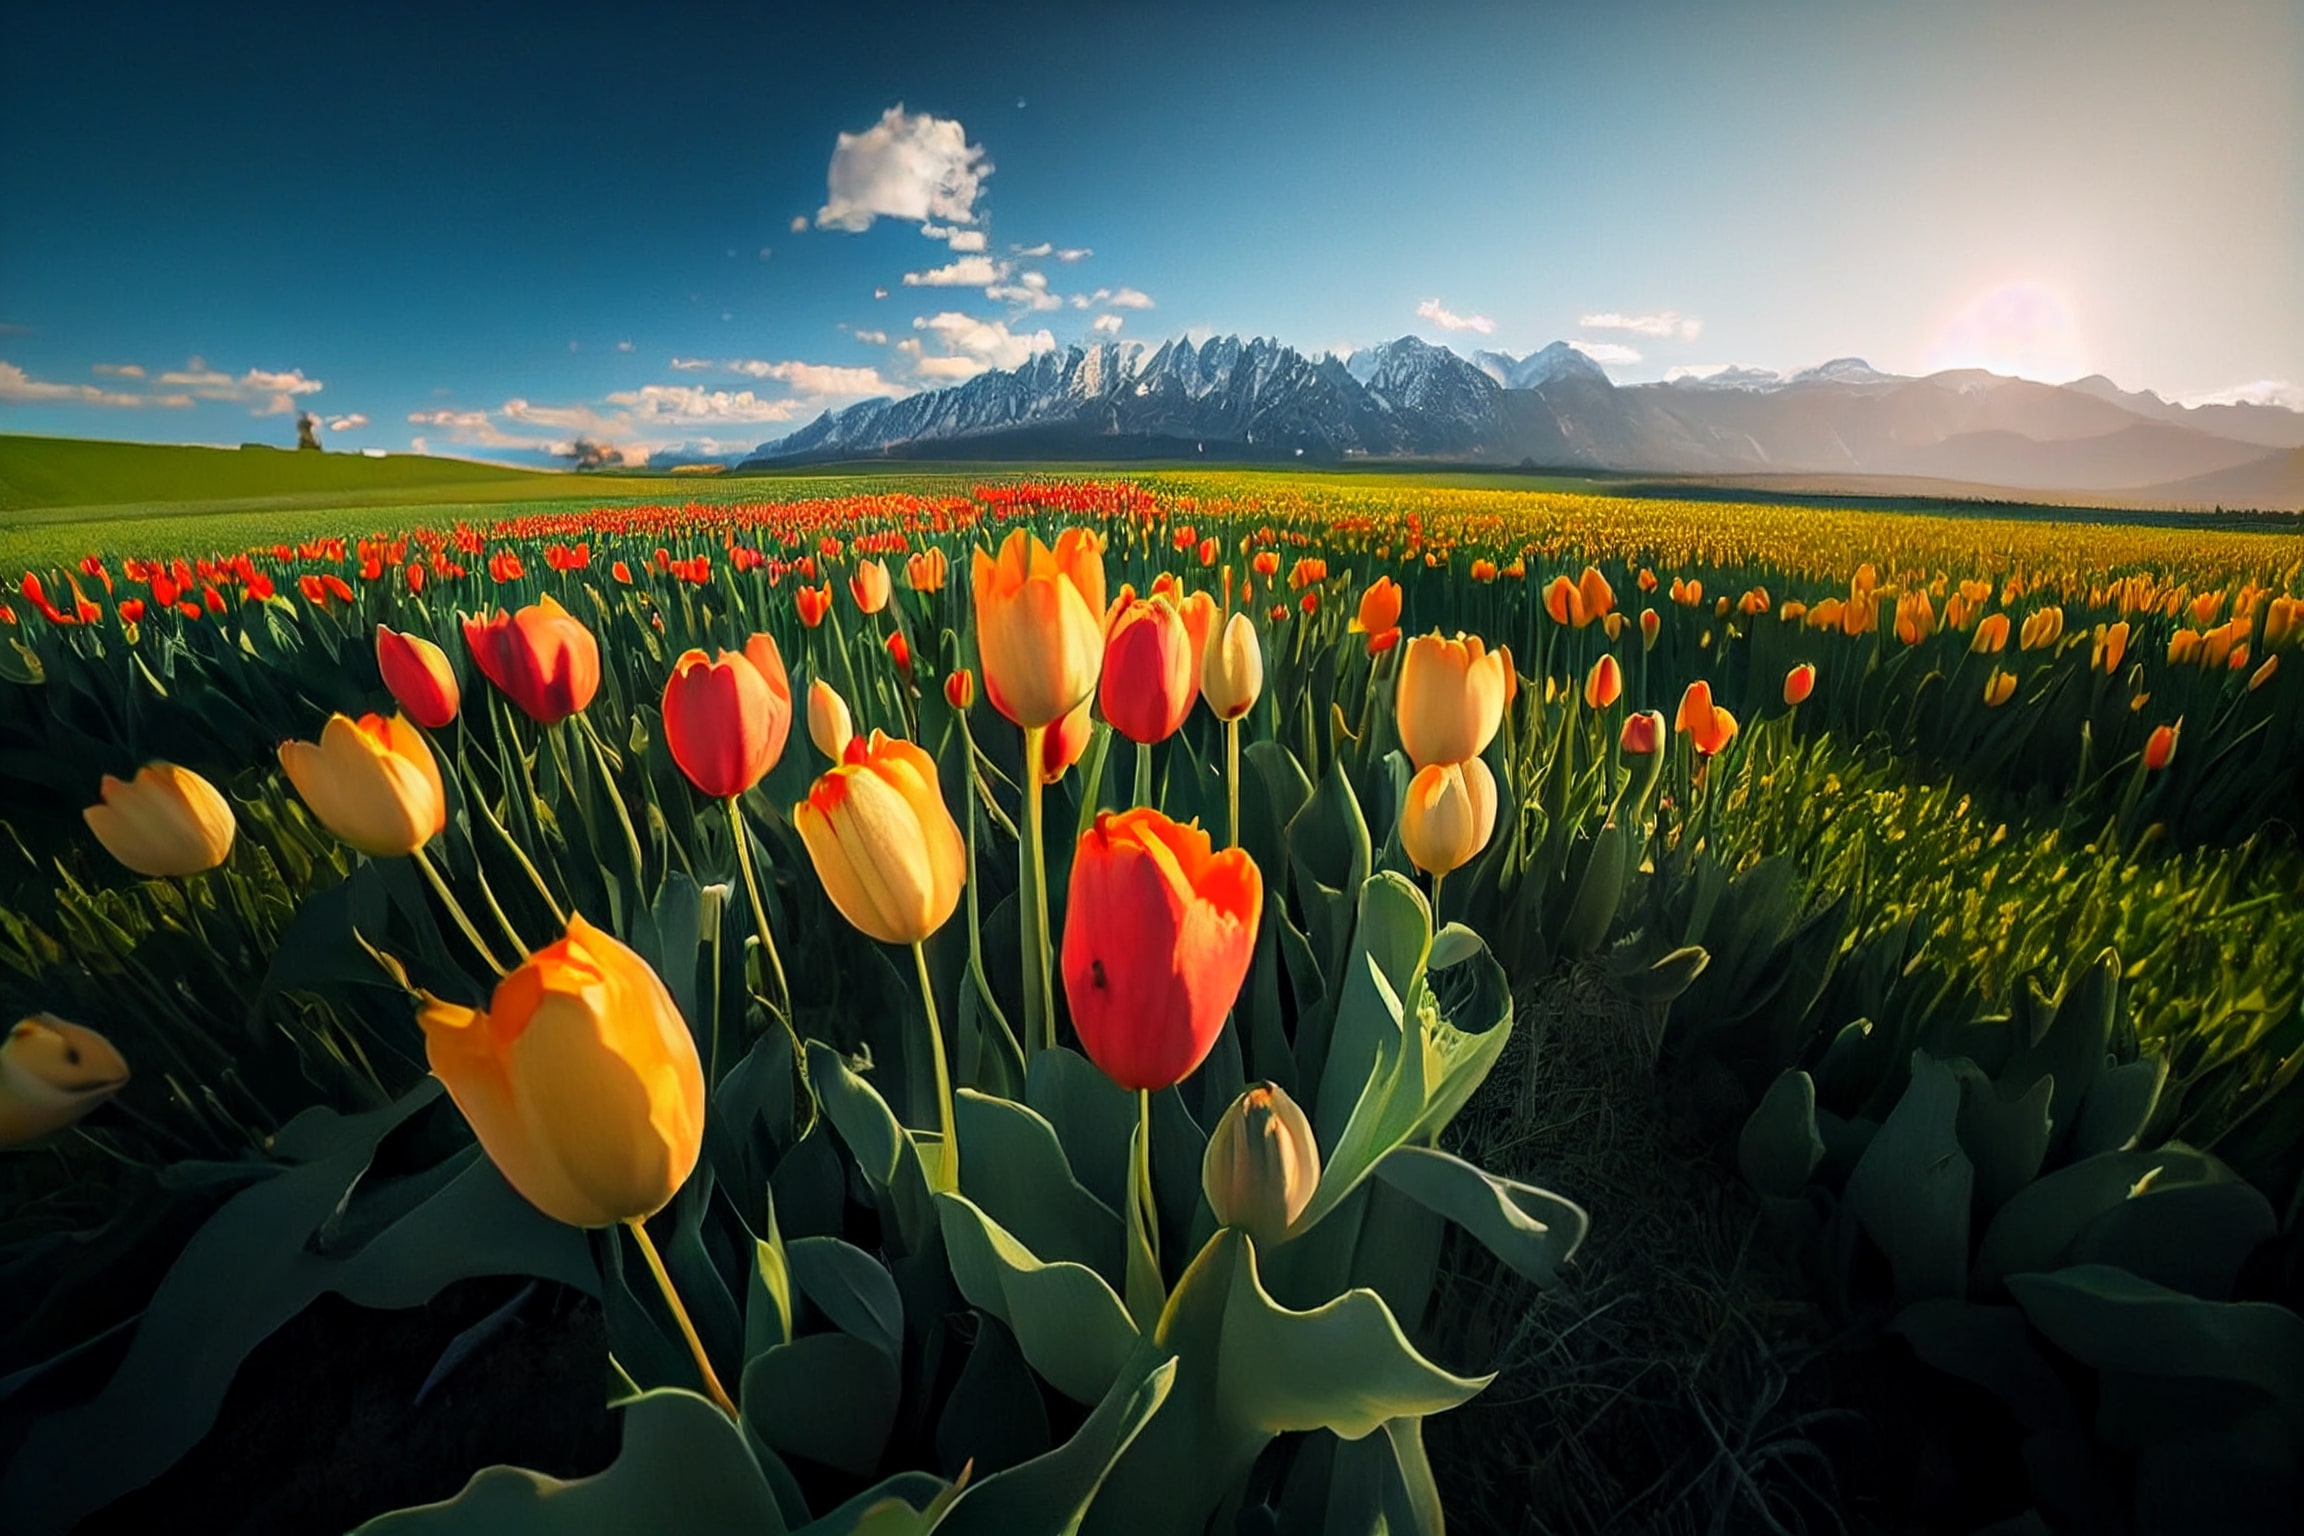 Field of yellow and red tulips with mountains in the background.